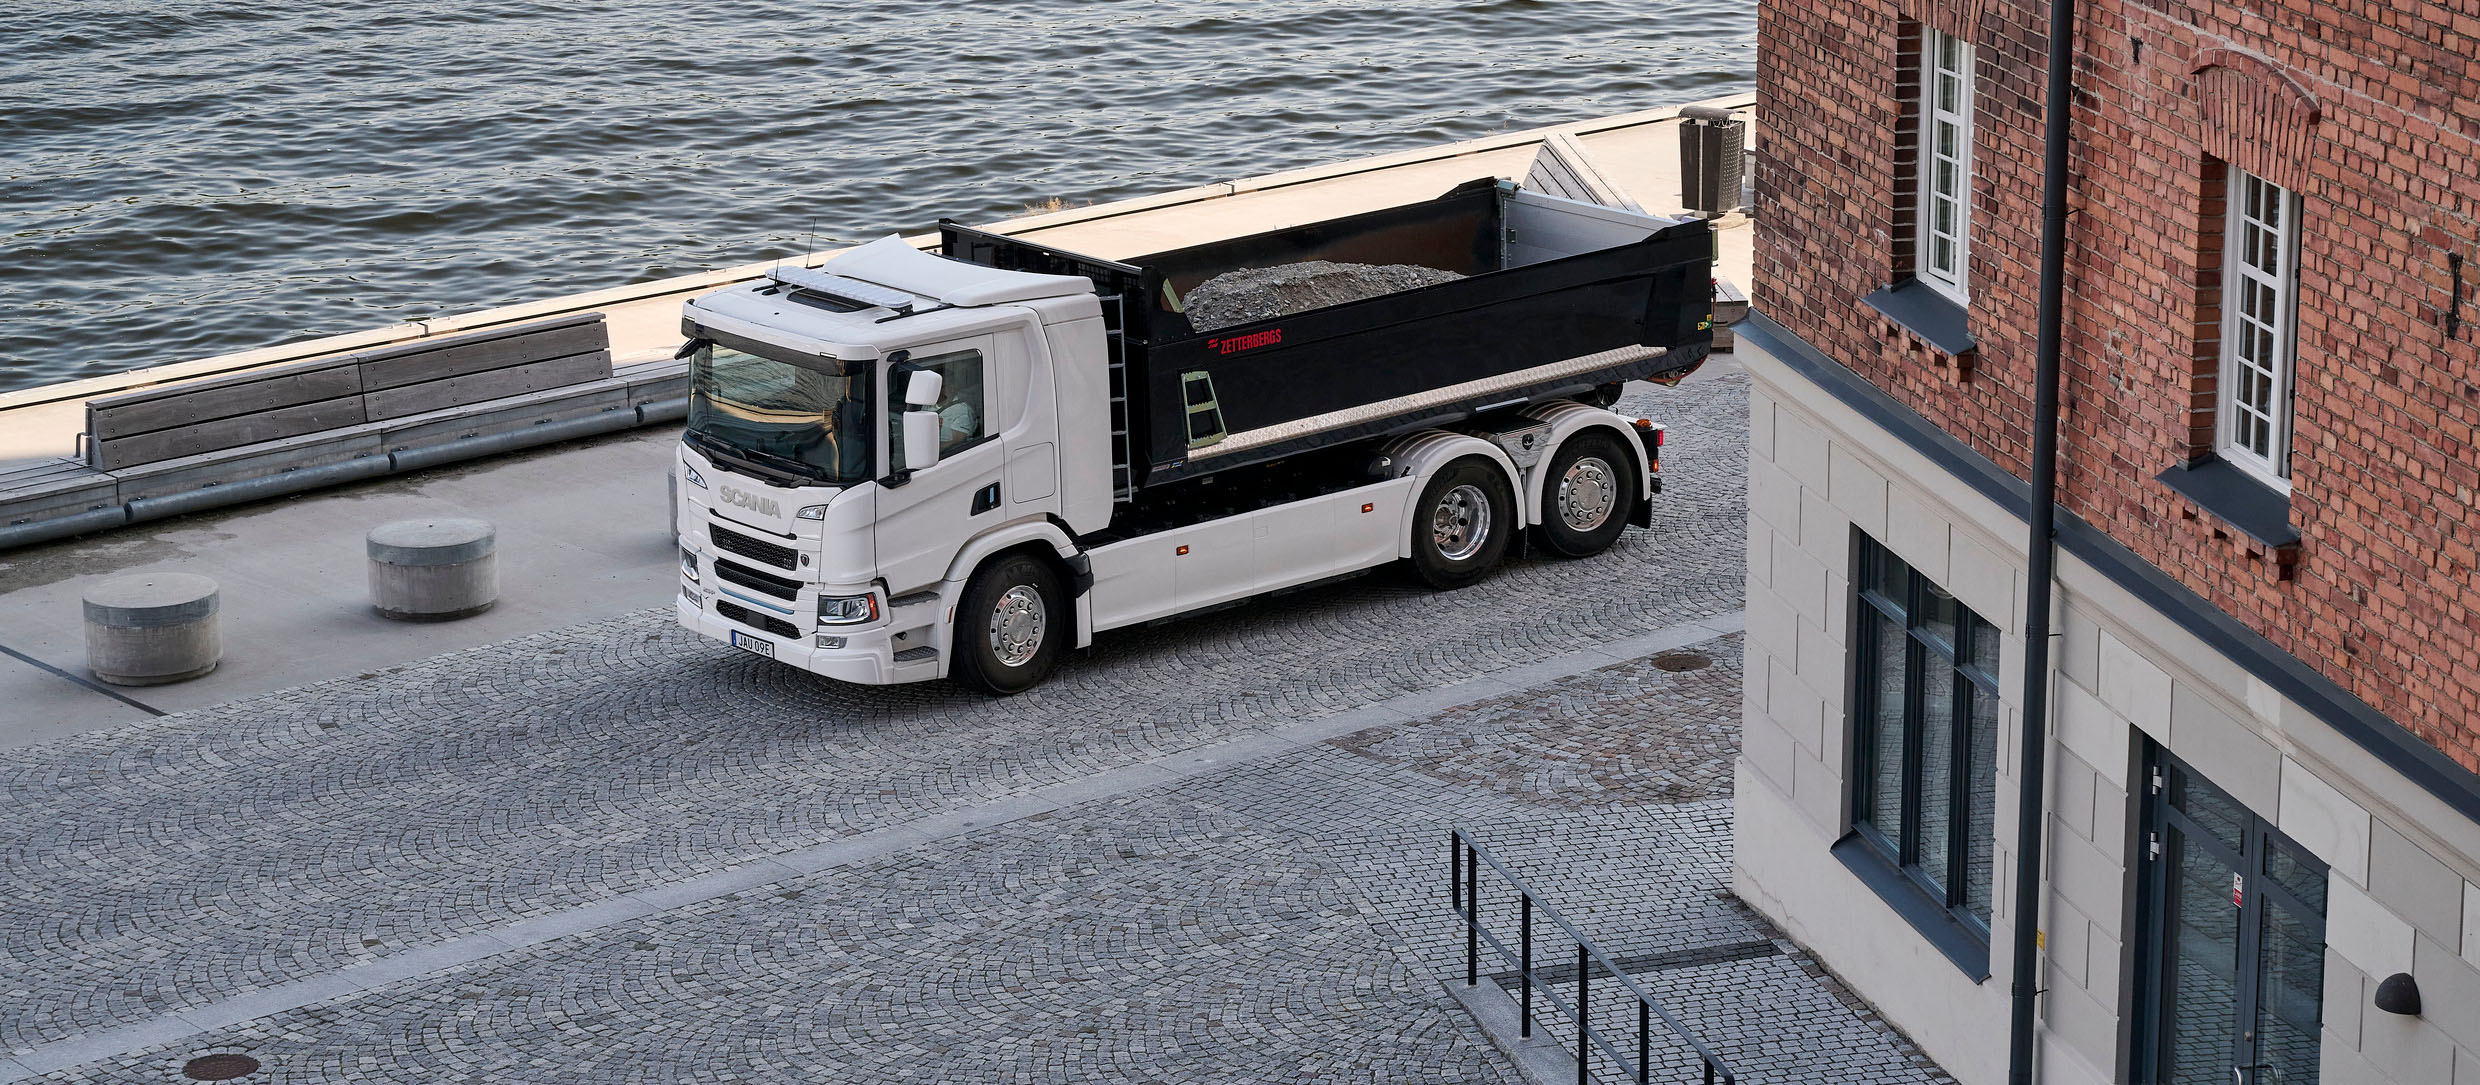 https://www.scania.com/content/dam/group/about-us/innovation/technology/electrification/electrification-scania-22157-026.jpg